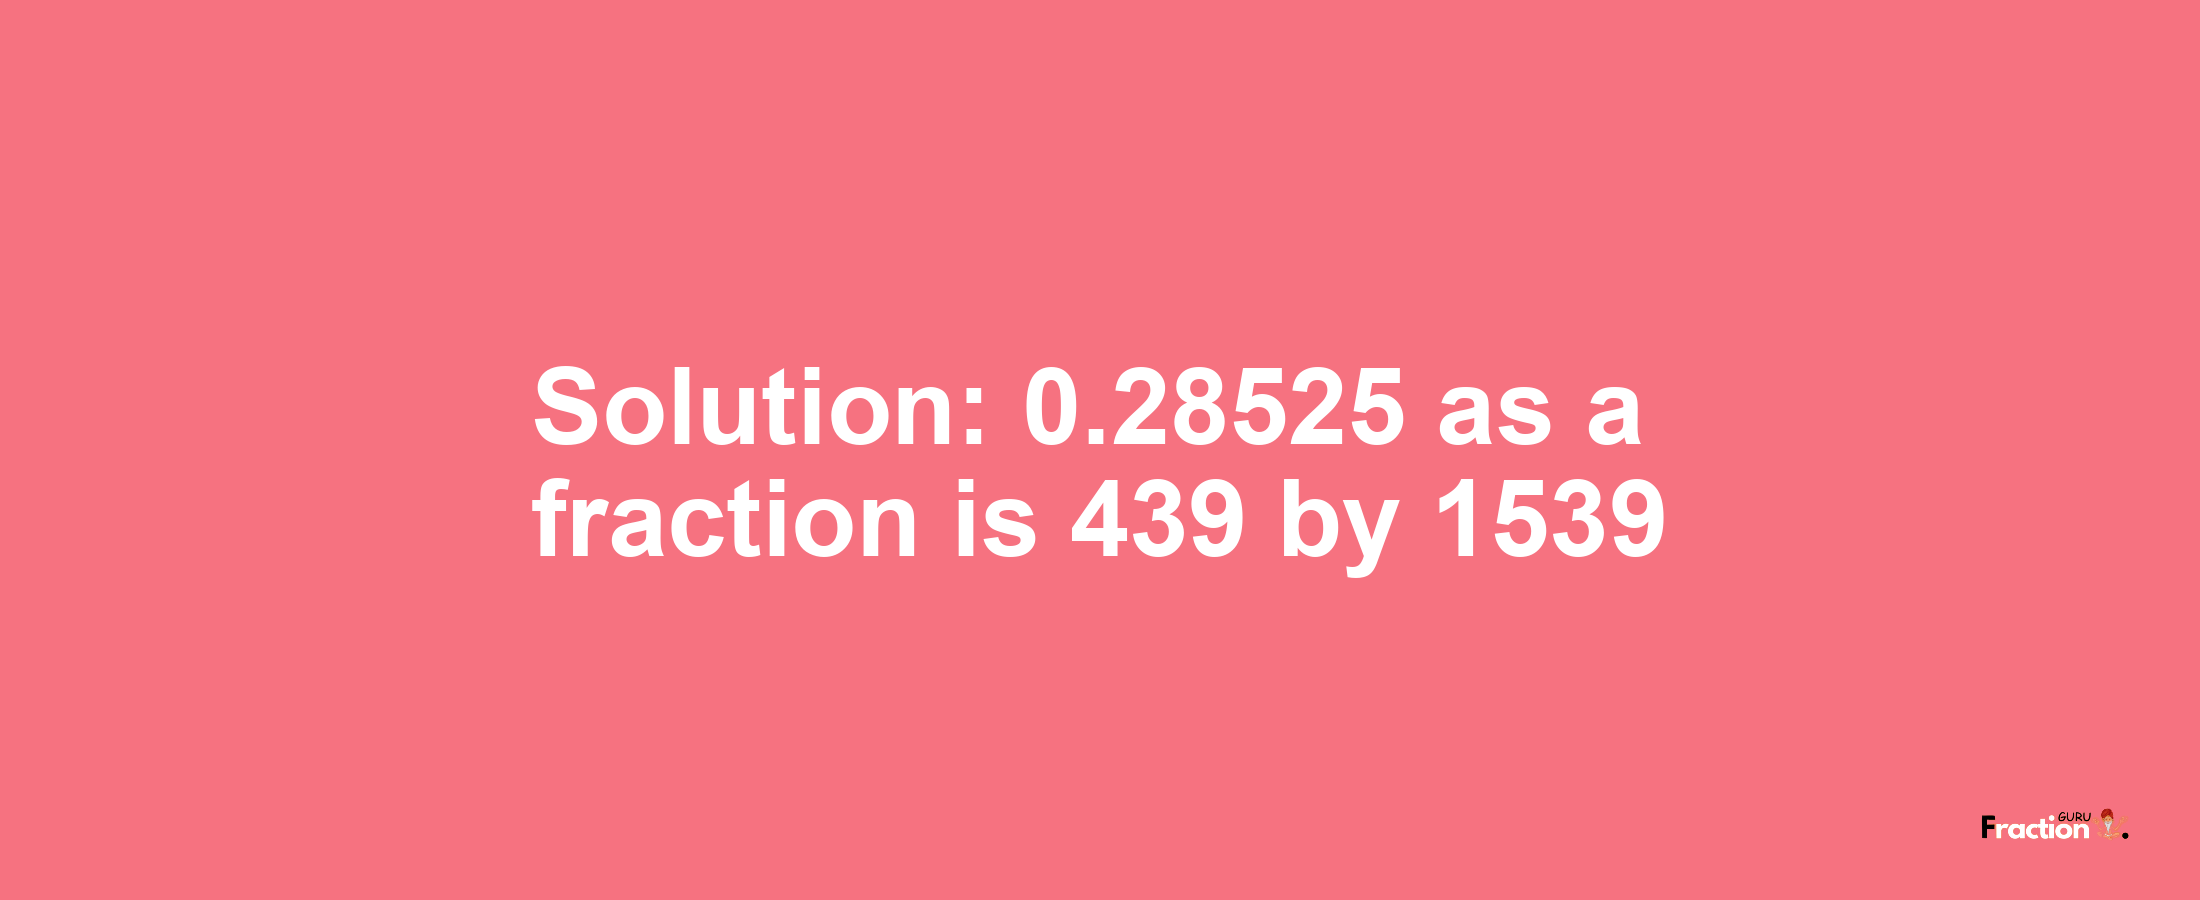 Solution:0.28525 as a fraction is 439/1539